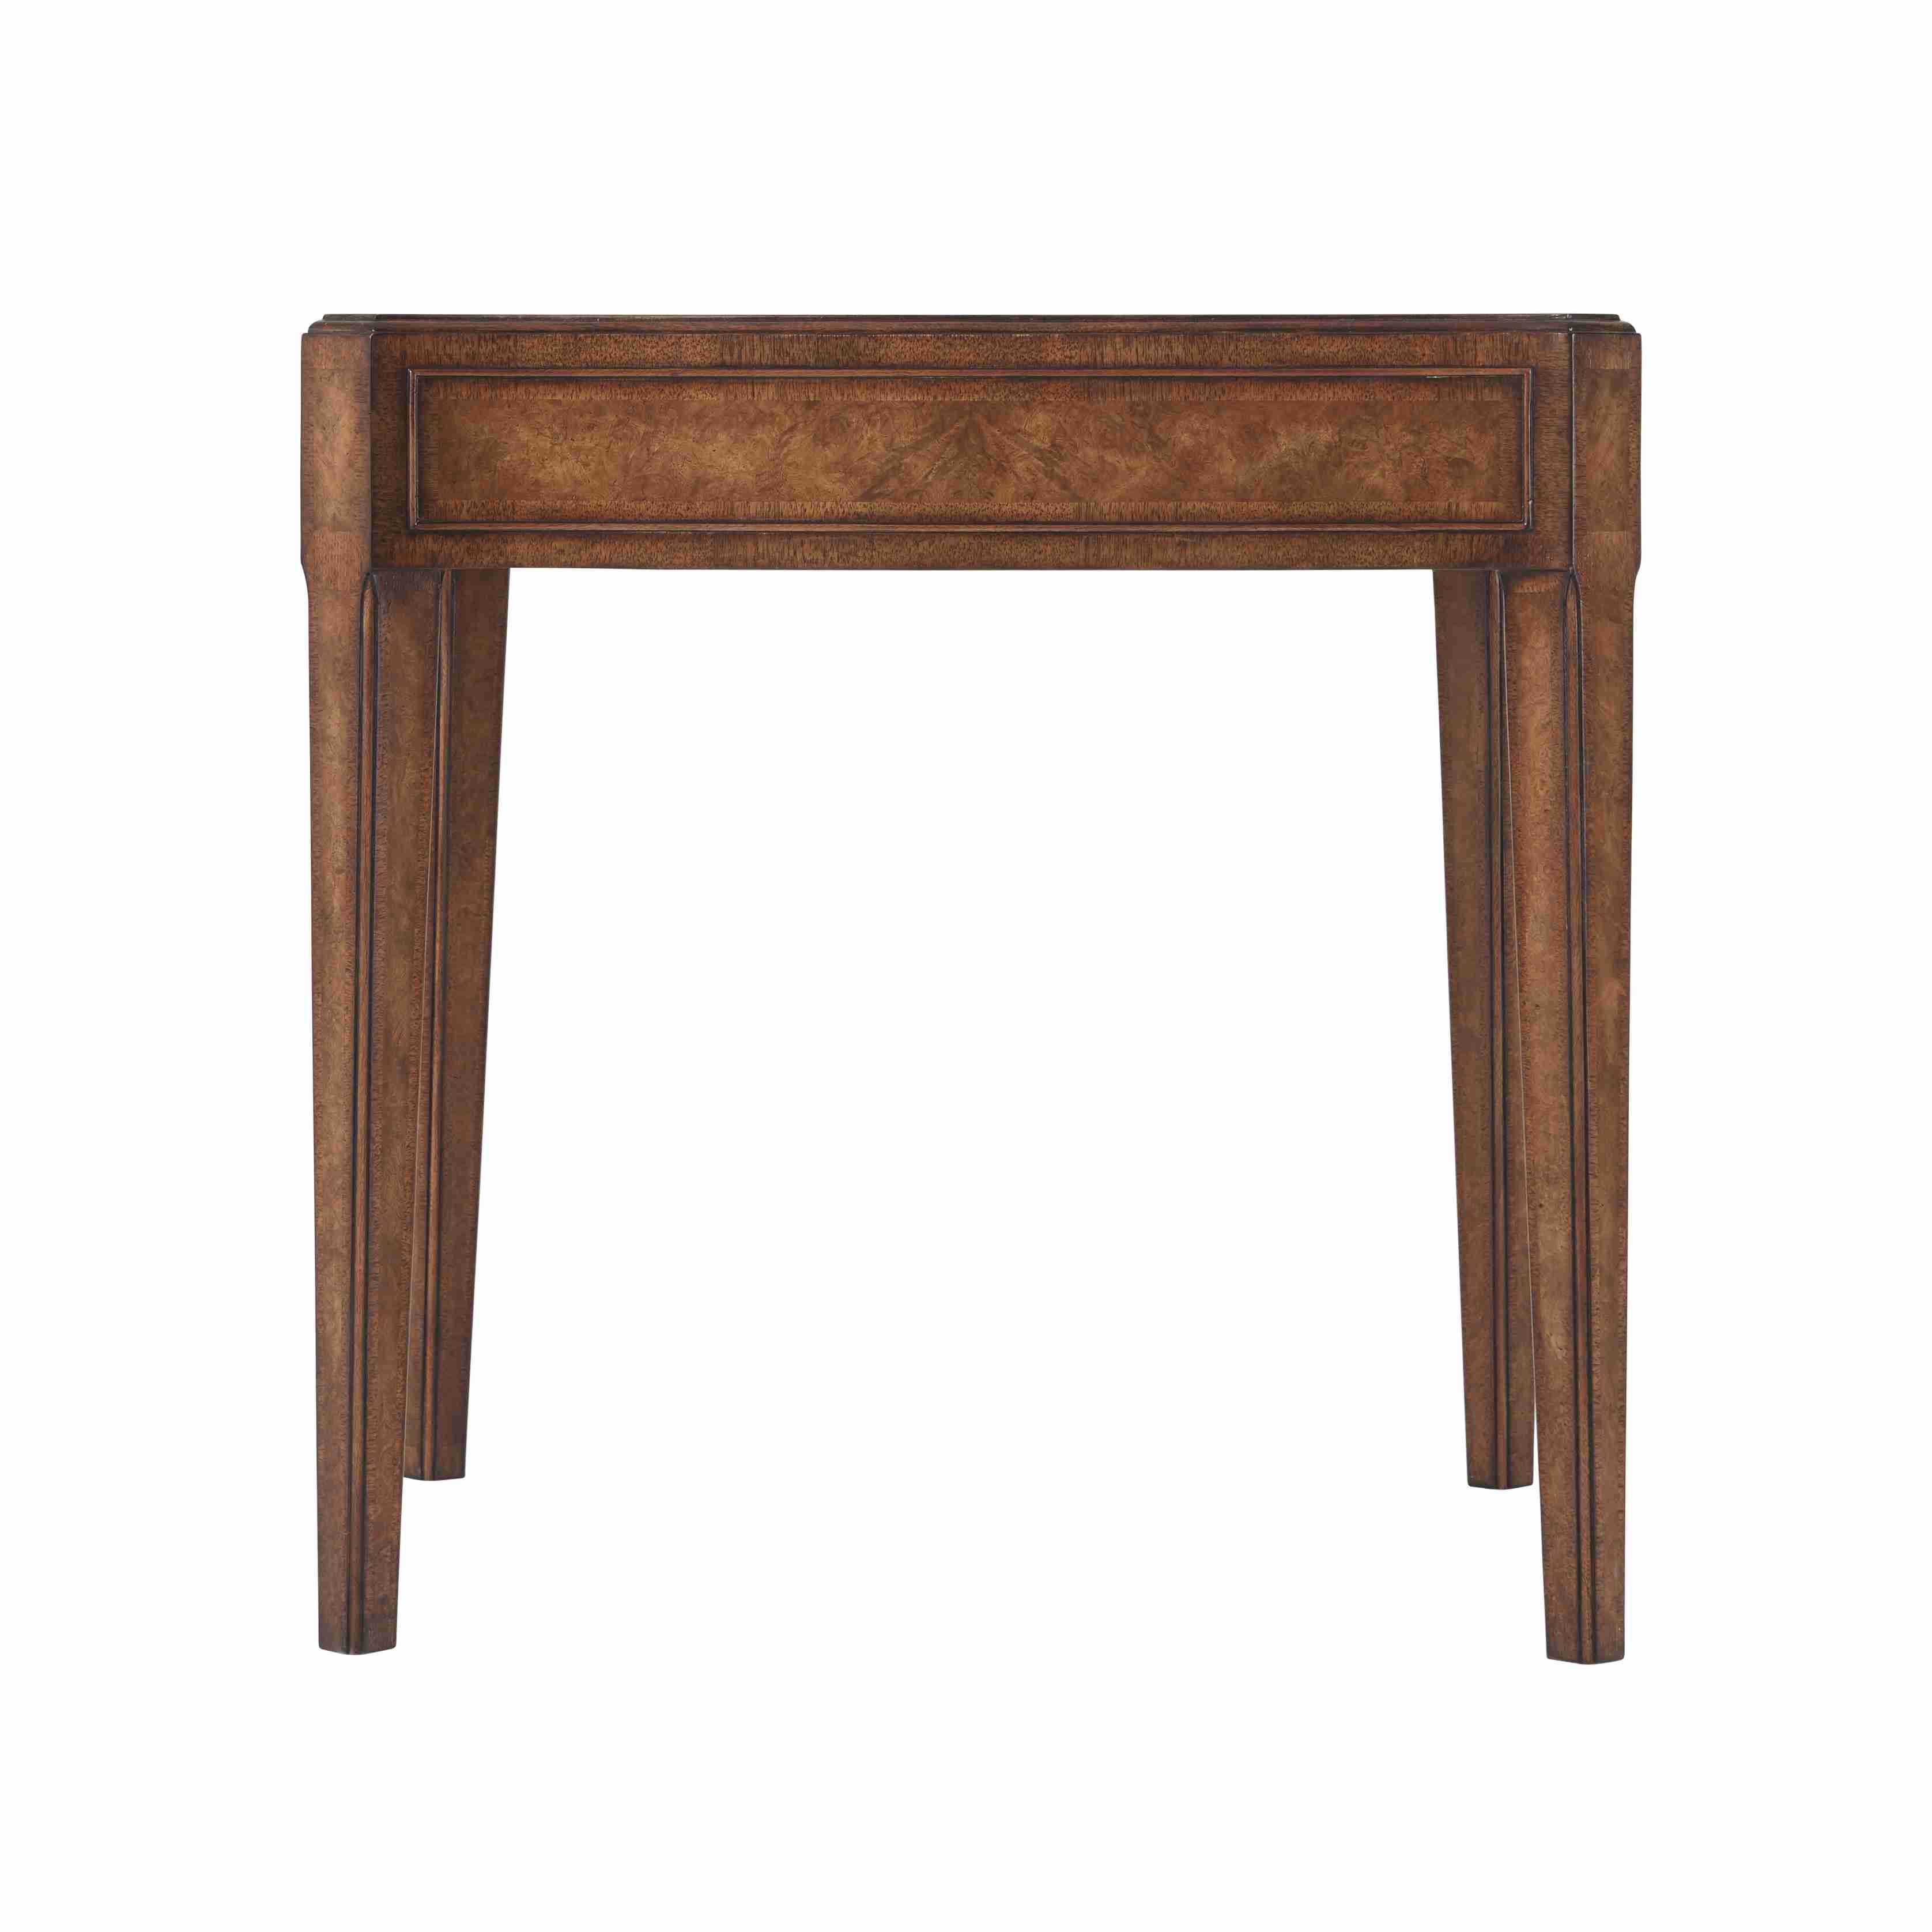 ROMILLY END TABLE